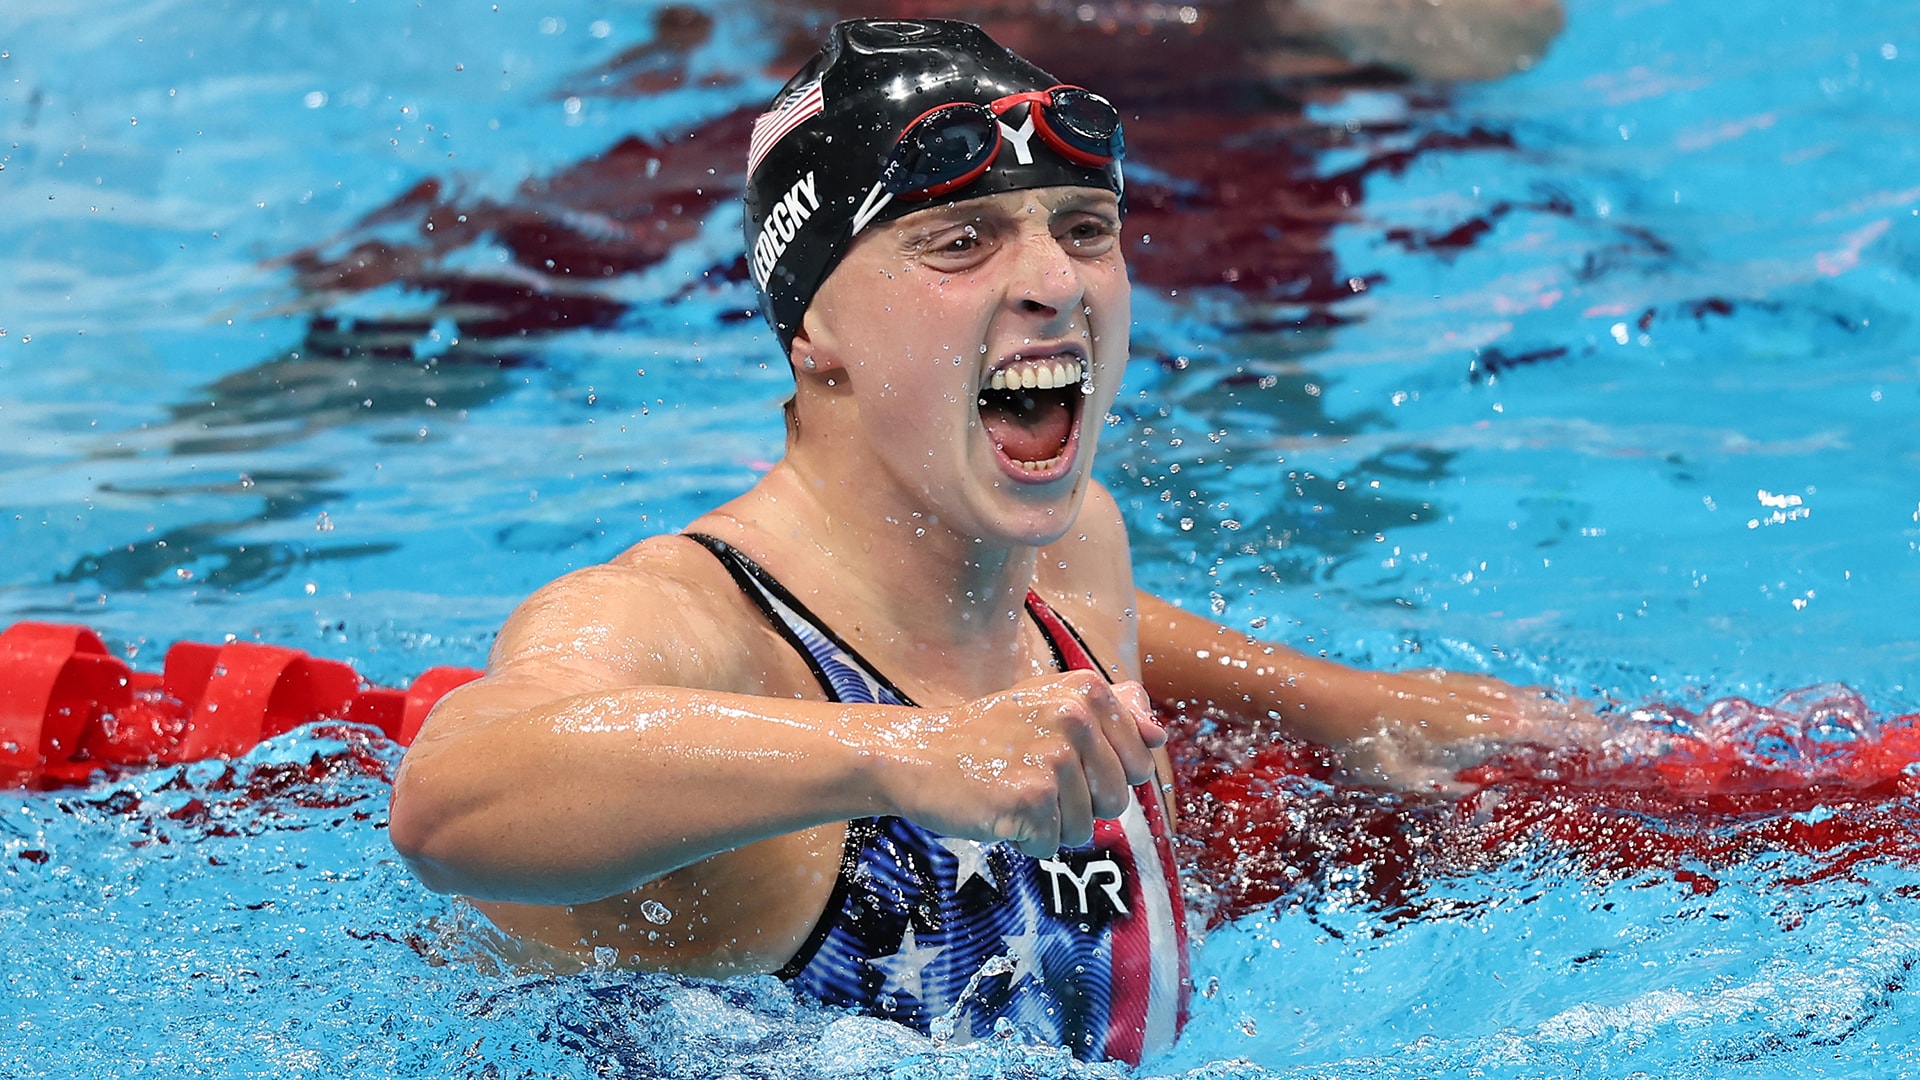 Merciful Isaac Senior citizens Katie Ledecky demolishes field to win first Olympic women's 1500 gold medal